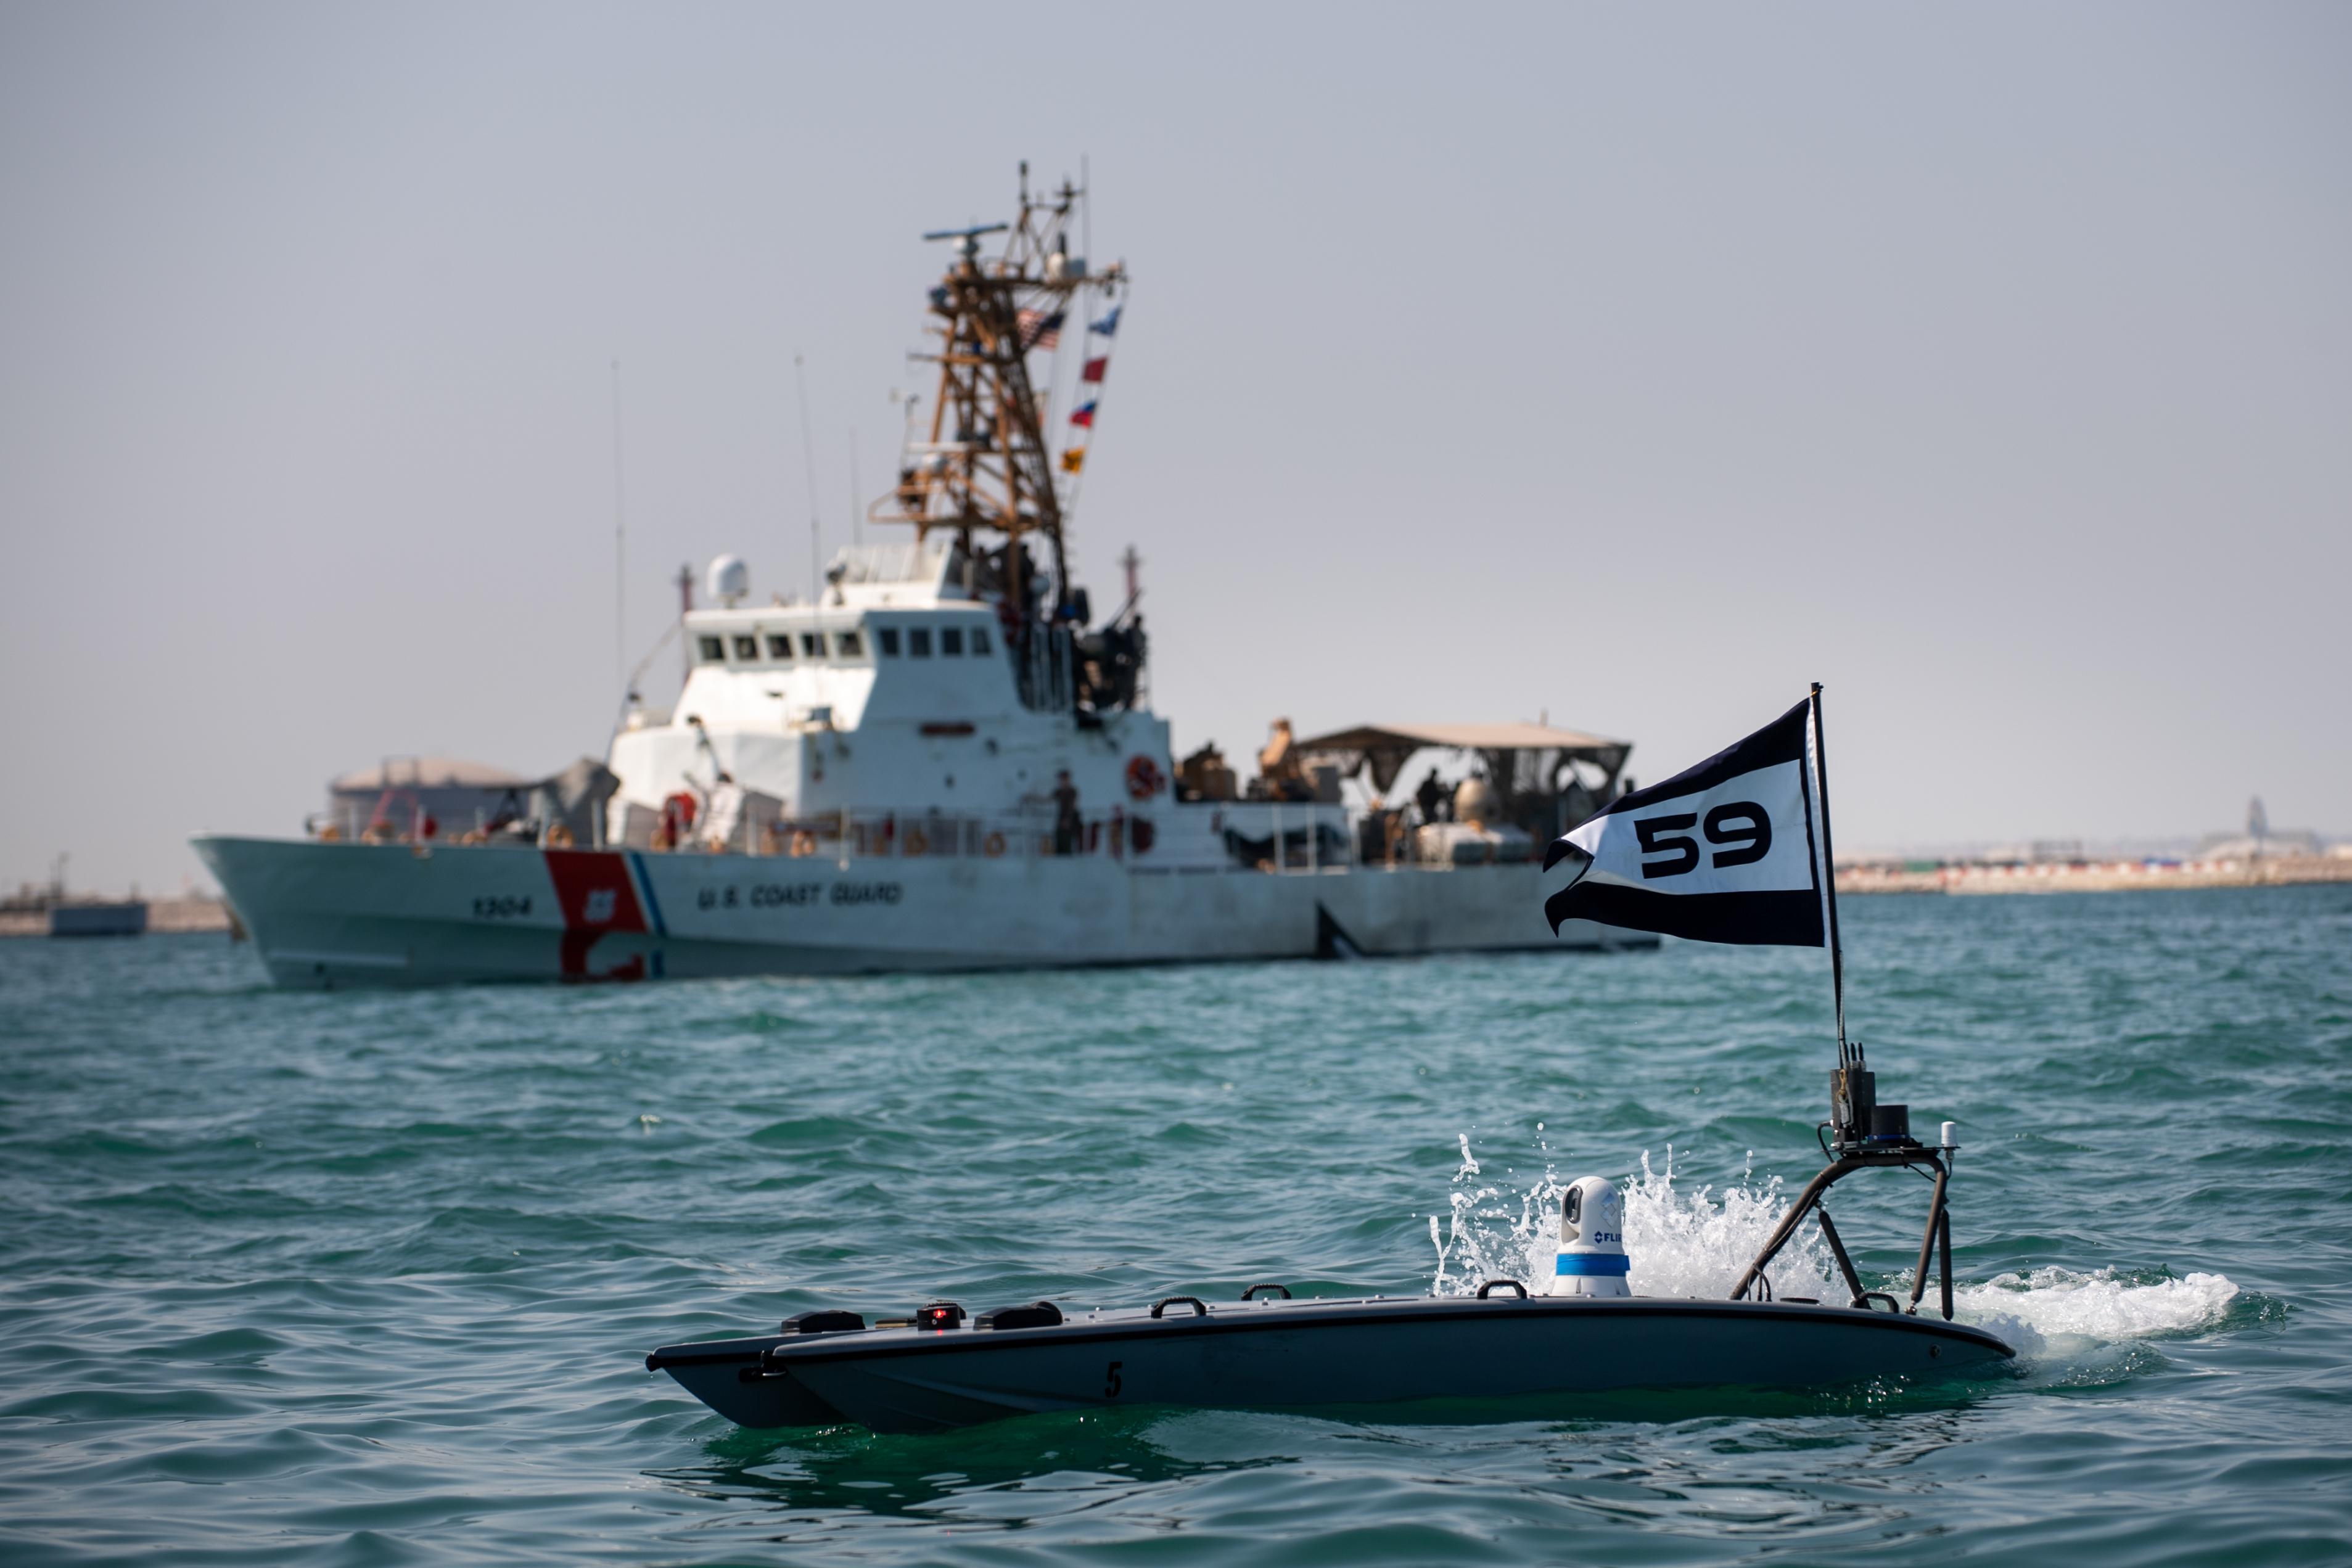 A MANTAS T-12 unmanned surface vessel (USV), front, operates alongside U.S. Coast Guard patrol boat USCGC Maui (WPB 1304) during exercise New Horizon in the Arabian Gulf, Oct. 26. Exercise New Horizon was U.S. Naval Forces Central Command Task Force 59’s first at-sea evolution since its establishment Sept. 9. (U.S. Navy photo by Mass Communication Specialist 2nd Class Dawson Roth)